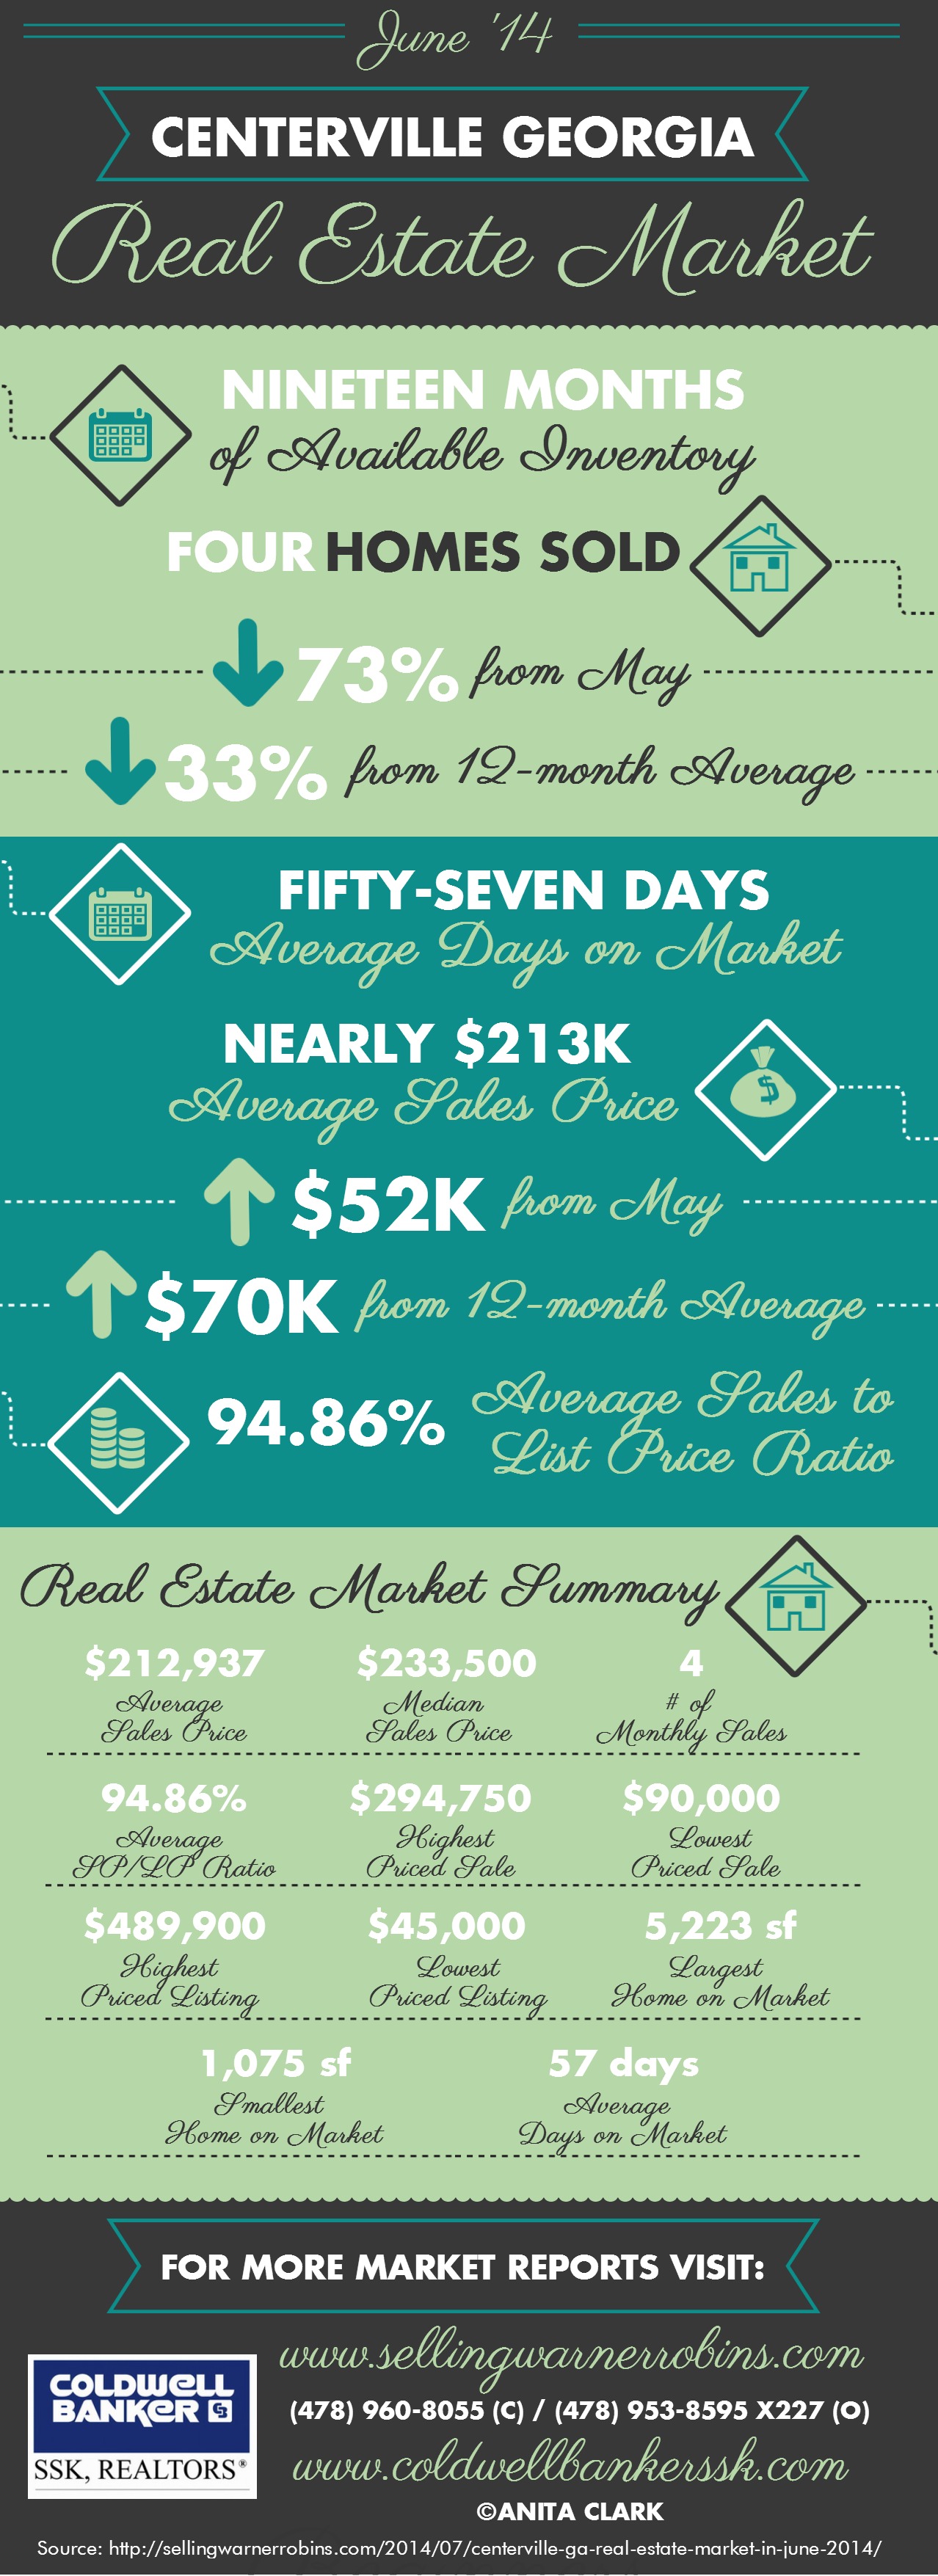 Centerville GA Real Estate Market in June 2014 Visual.ly